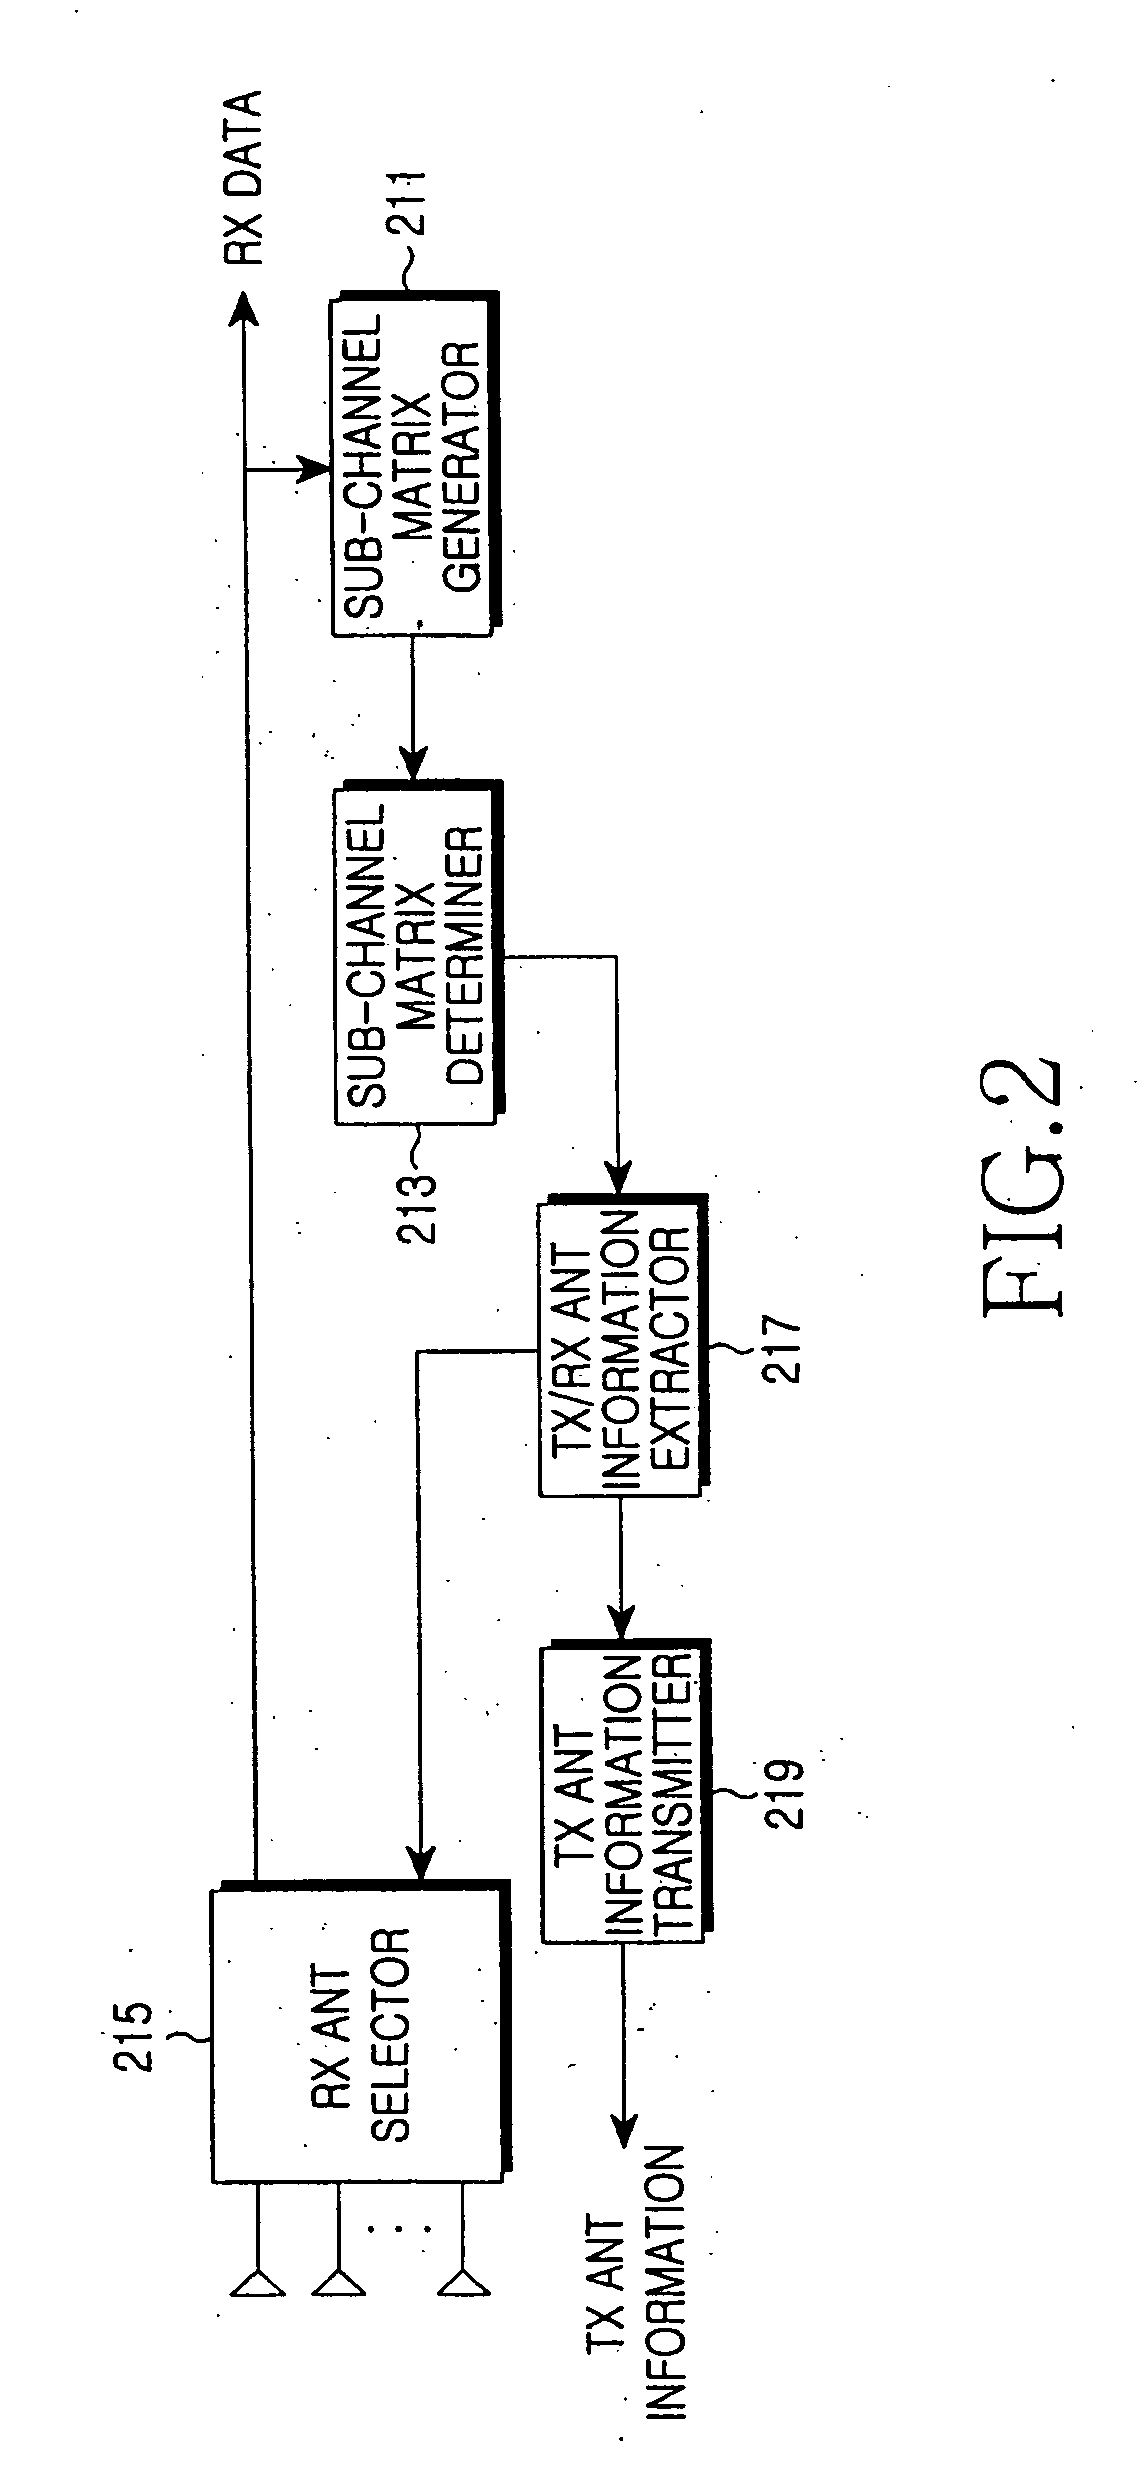 Apparatus and method for determining transmit/receive antenna in communication system using multiple antennas